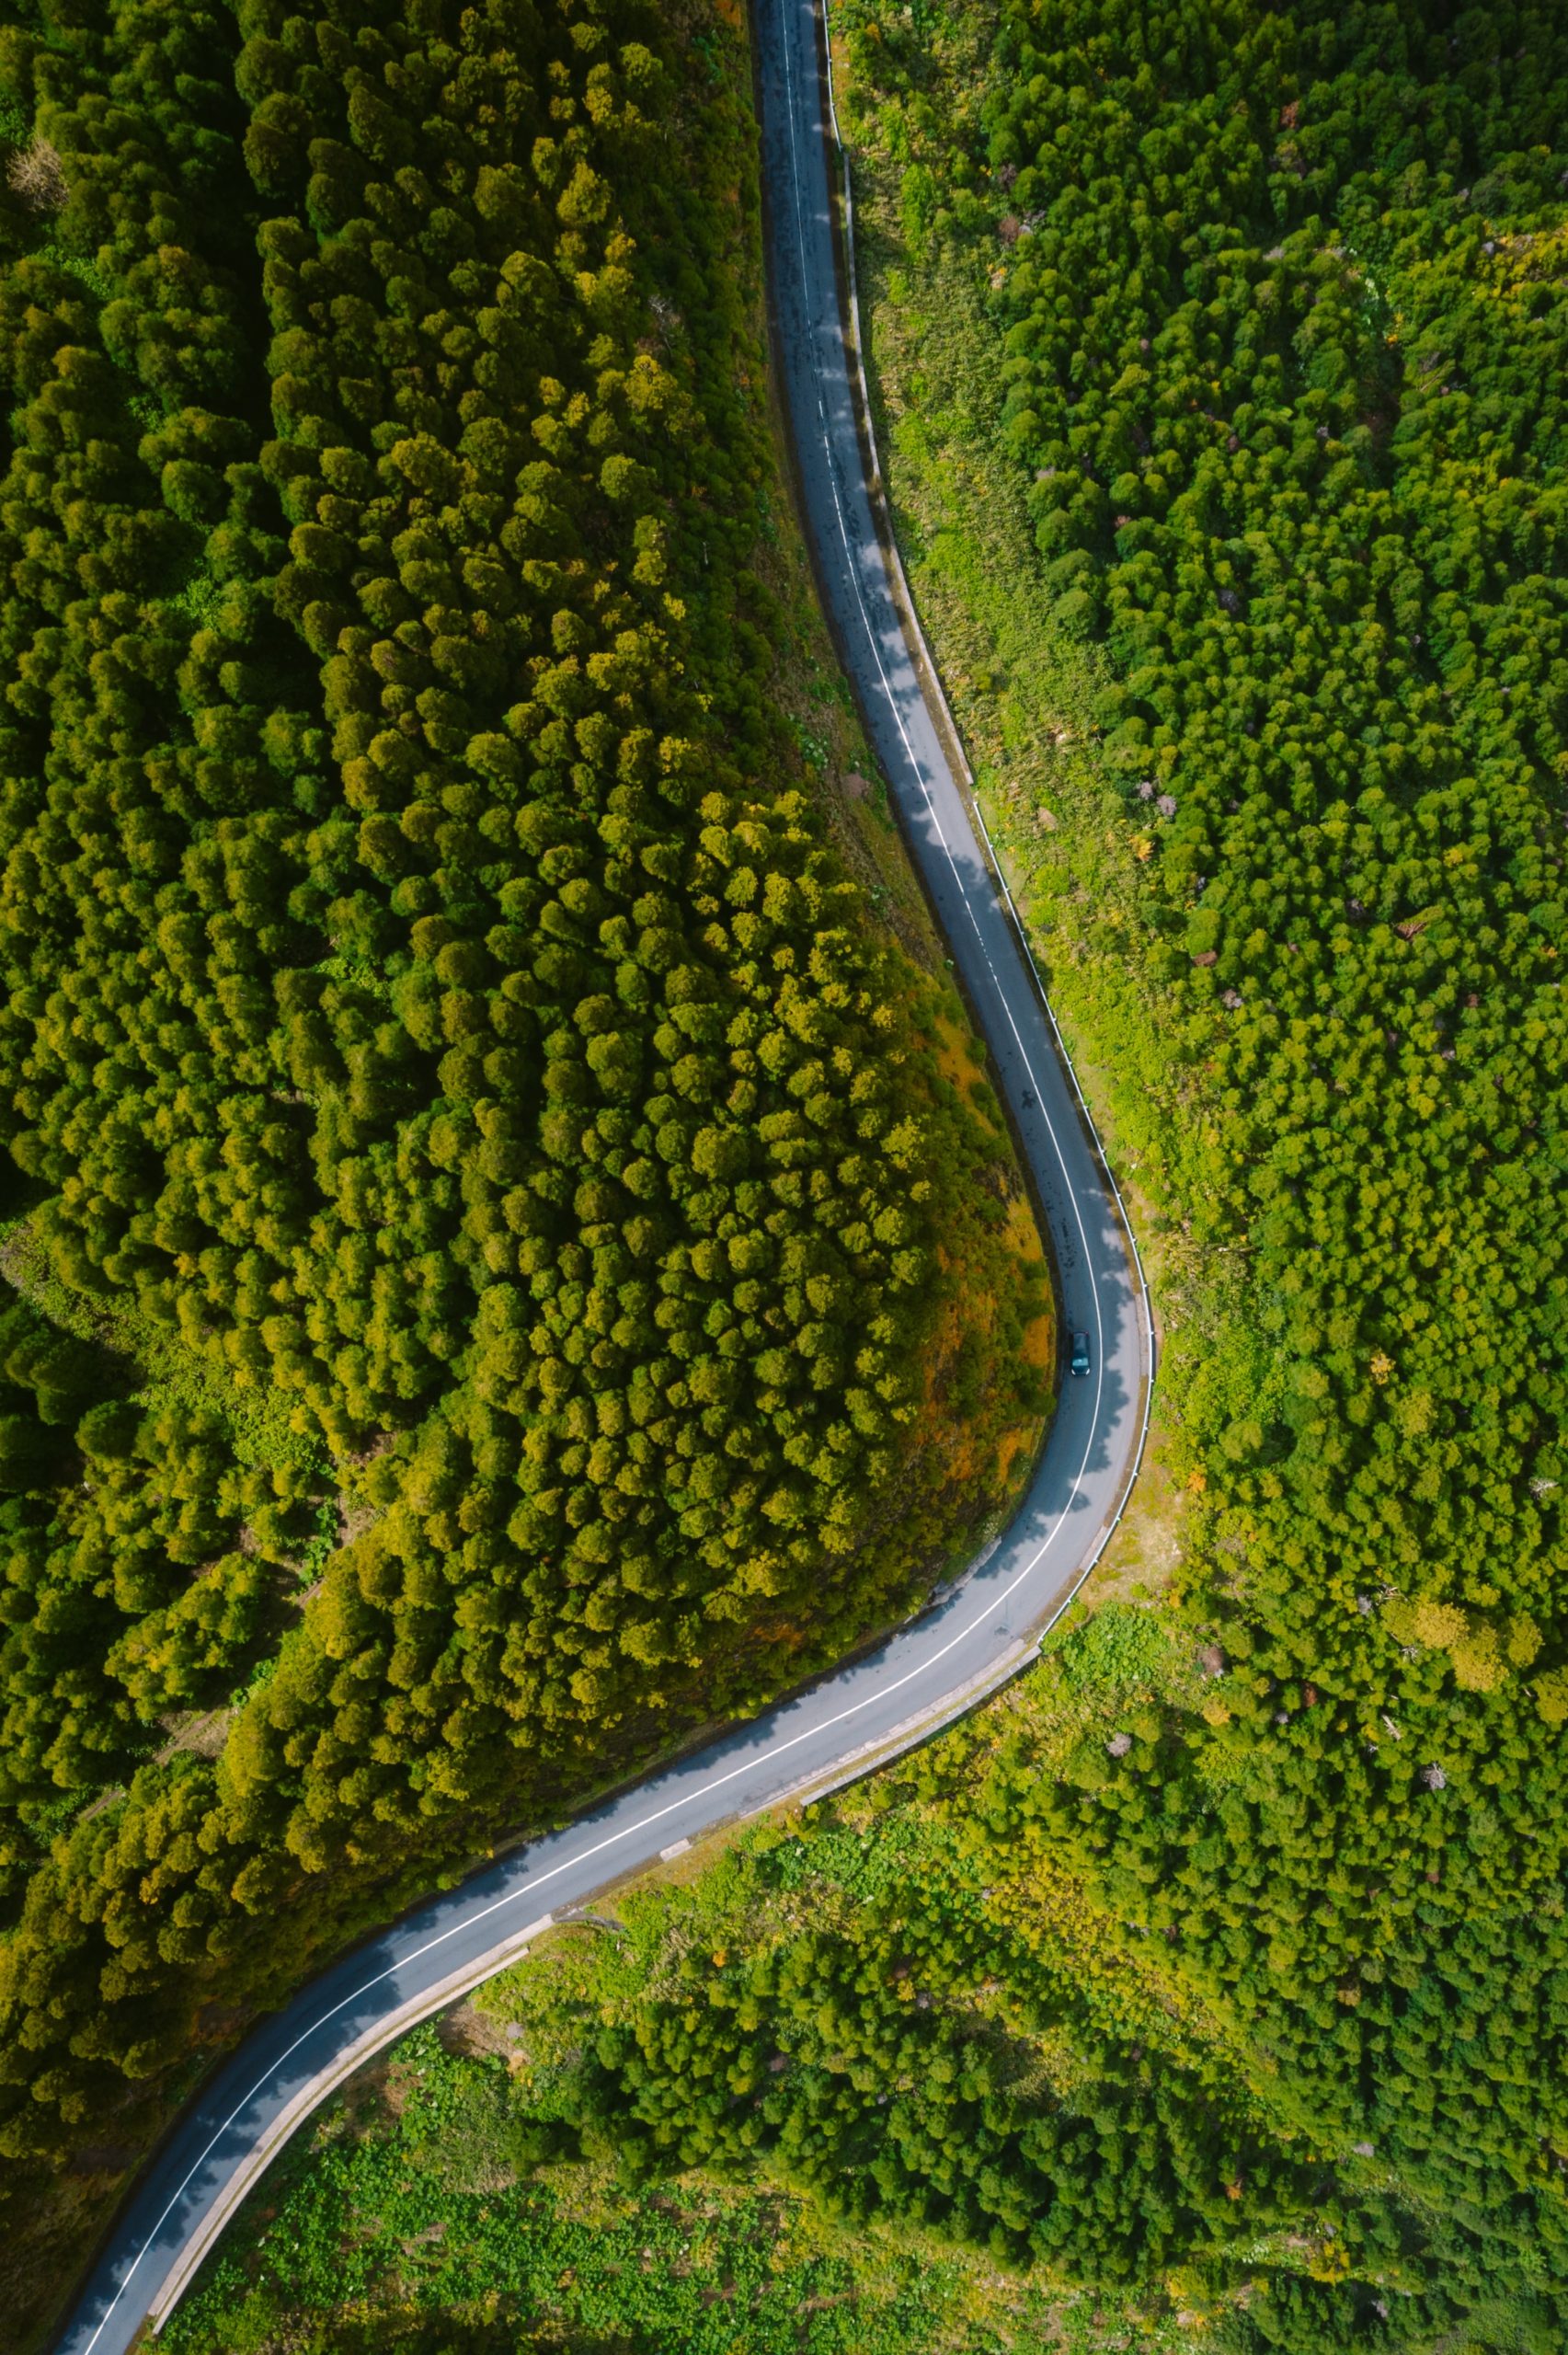 A beautiful, winding road meandering through a lush forest seen from an aerial perspective.